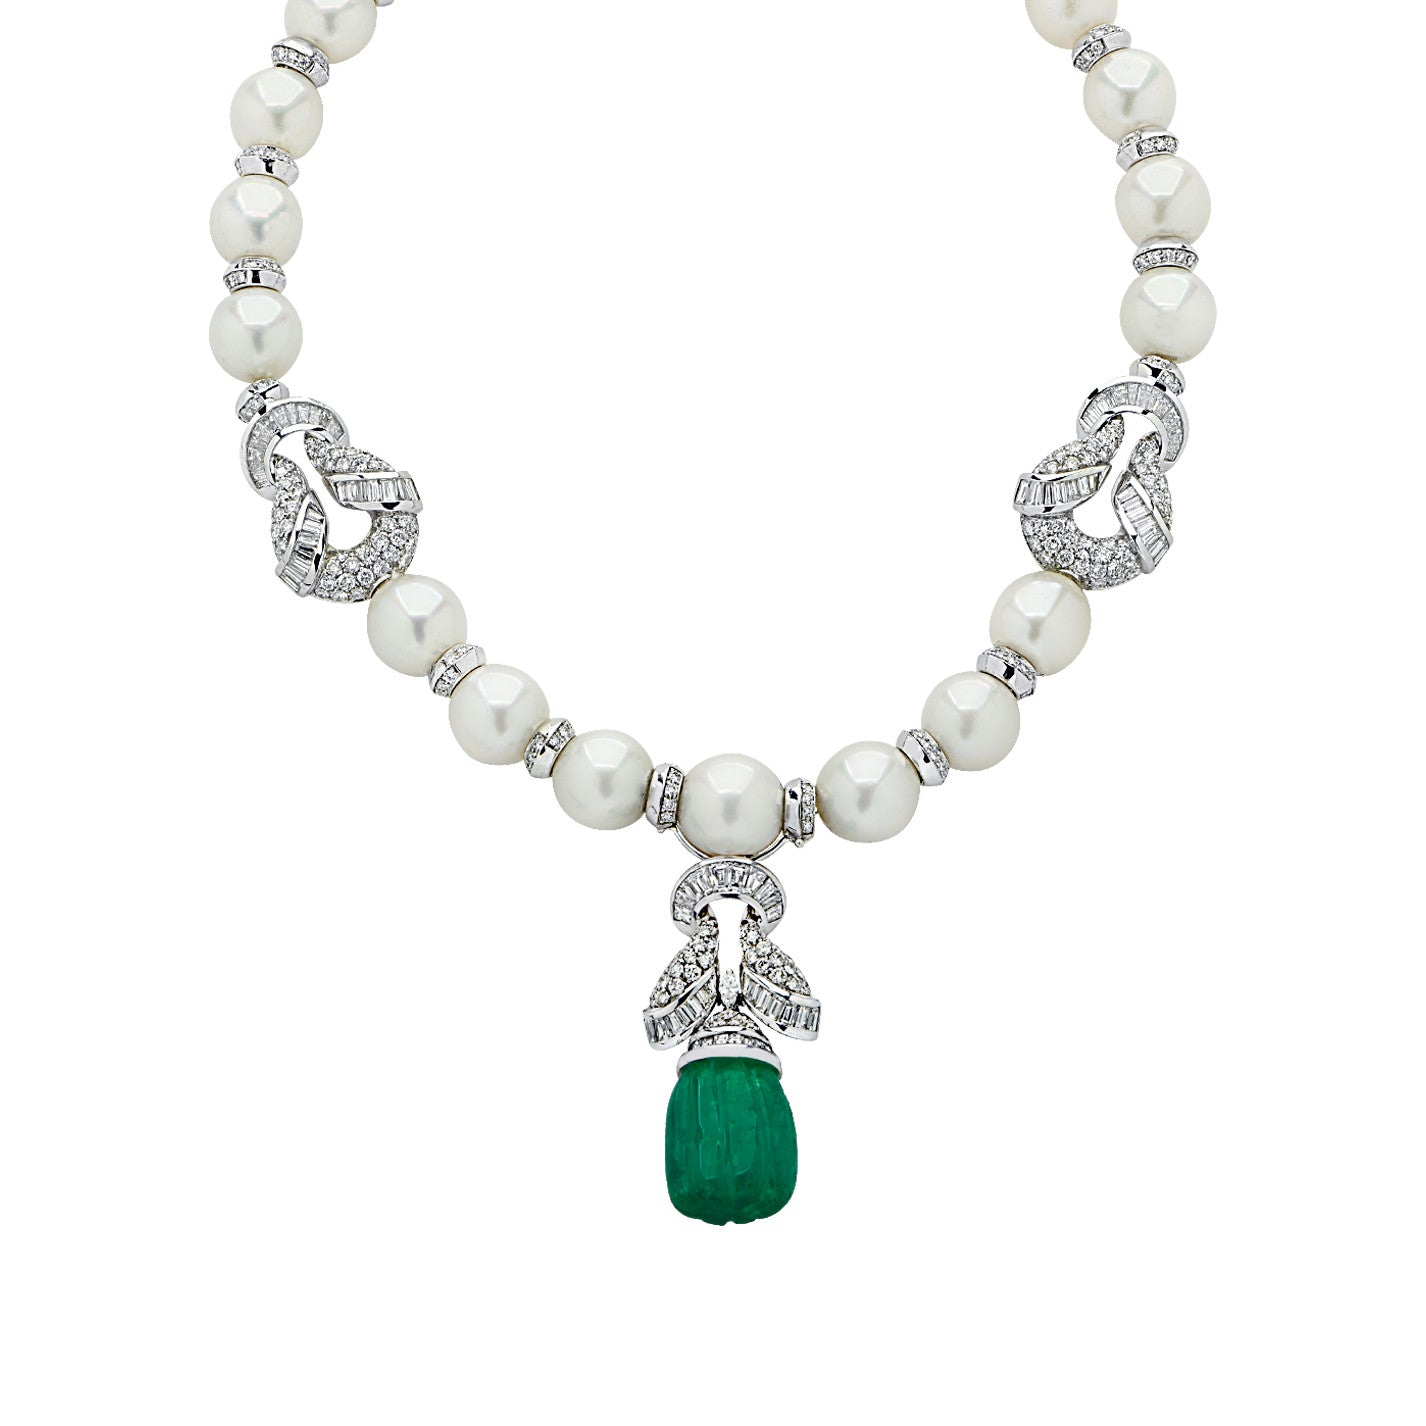 Piranesi Italy 1980s Platinum Emerald, Diamond & Cultured Pearl Necklace front view